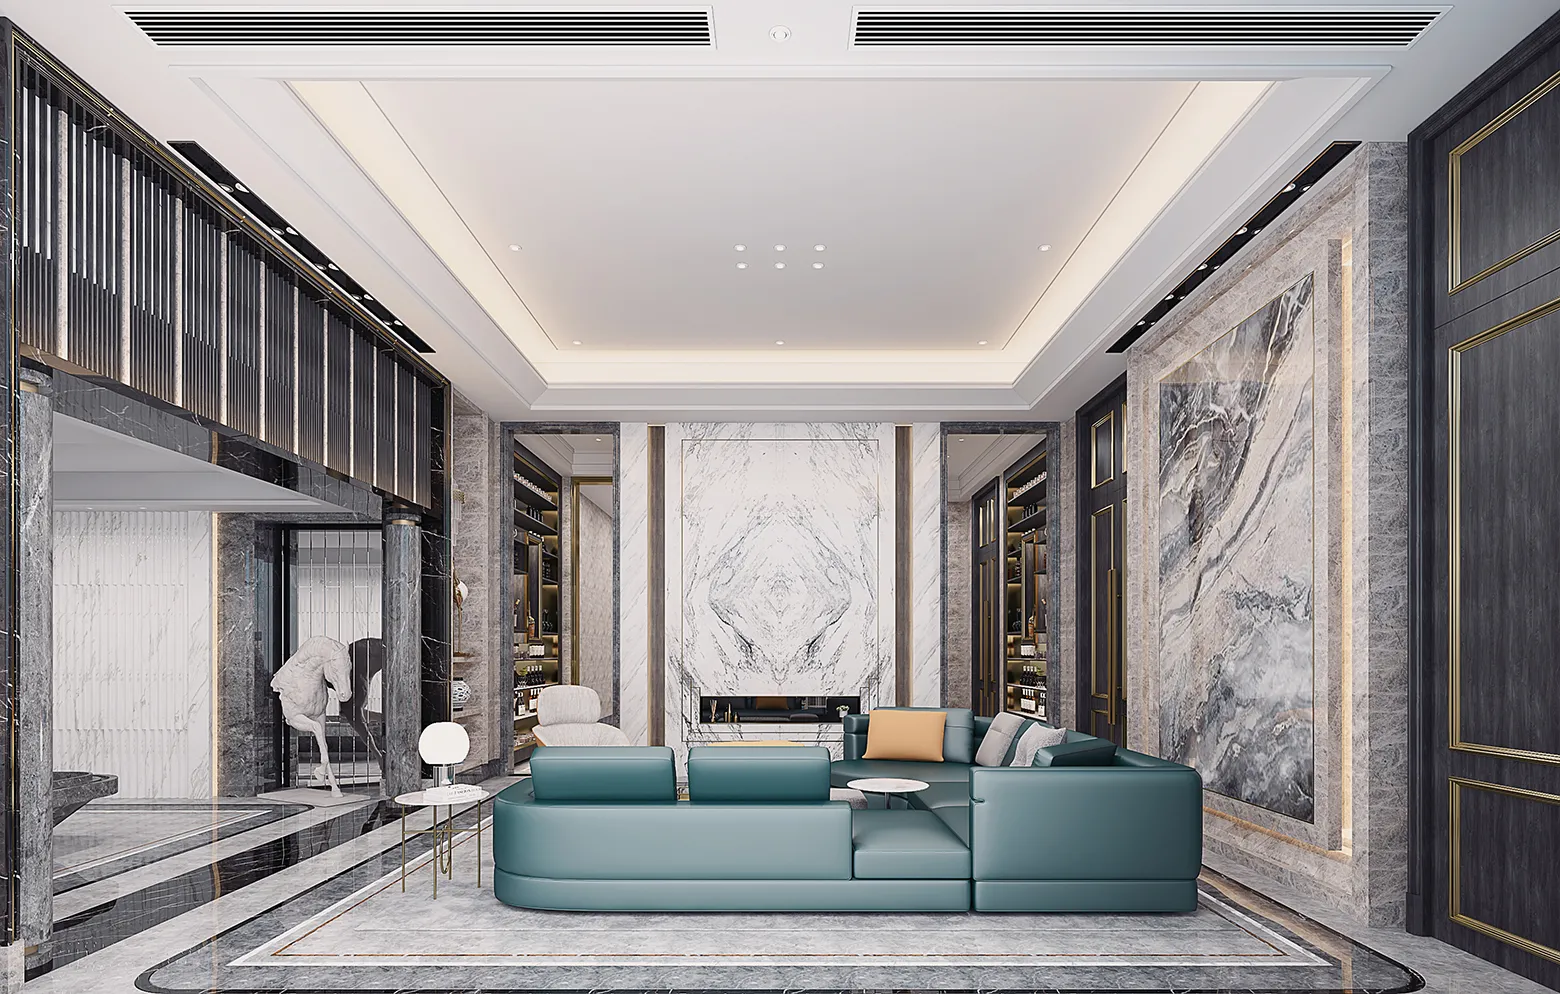 DESMOD INTERIOR 2021 (VRAY) – 4. LIVING ROOM – CHINESE – 110 (1)